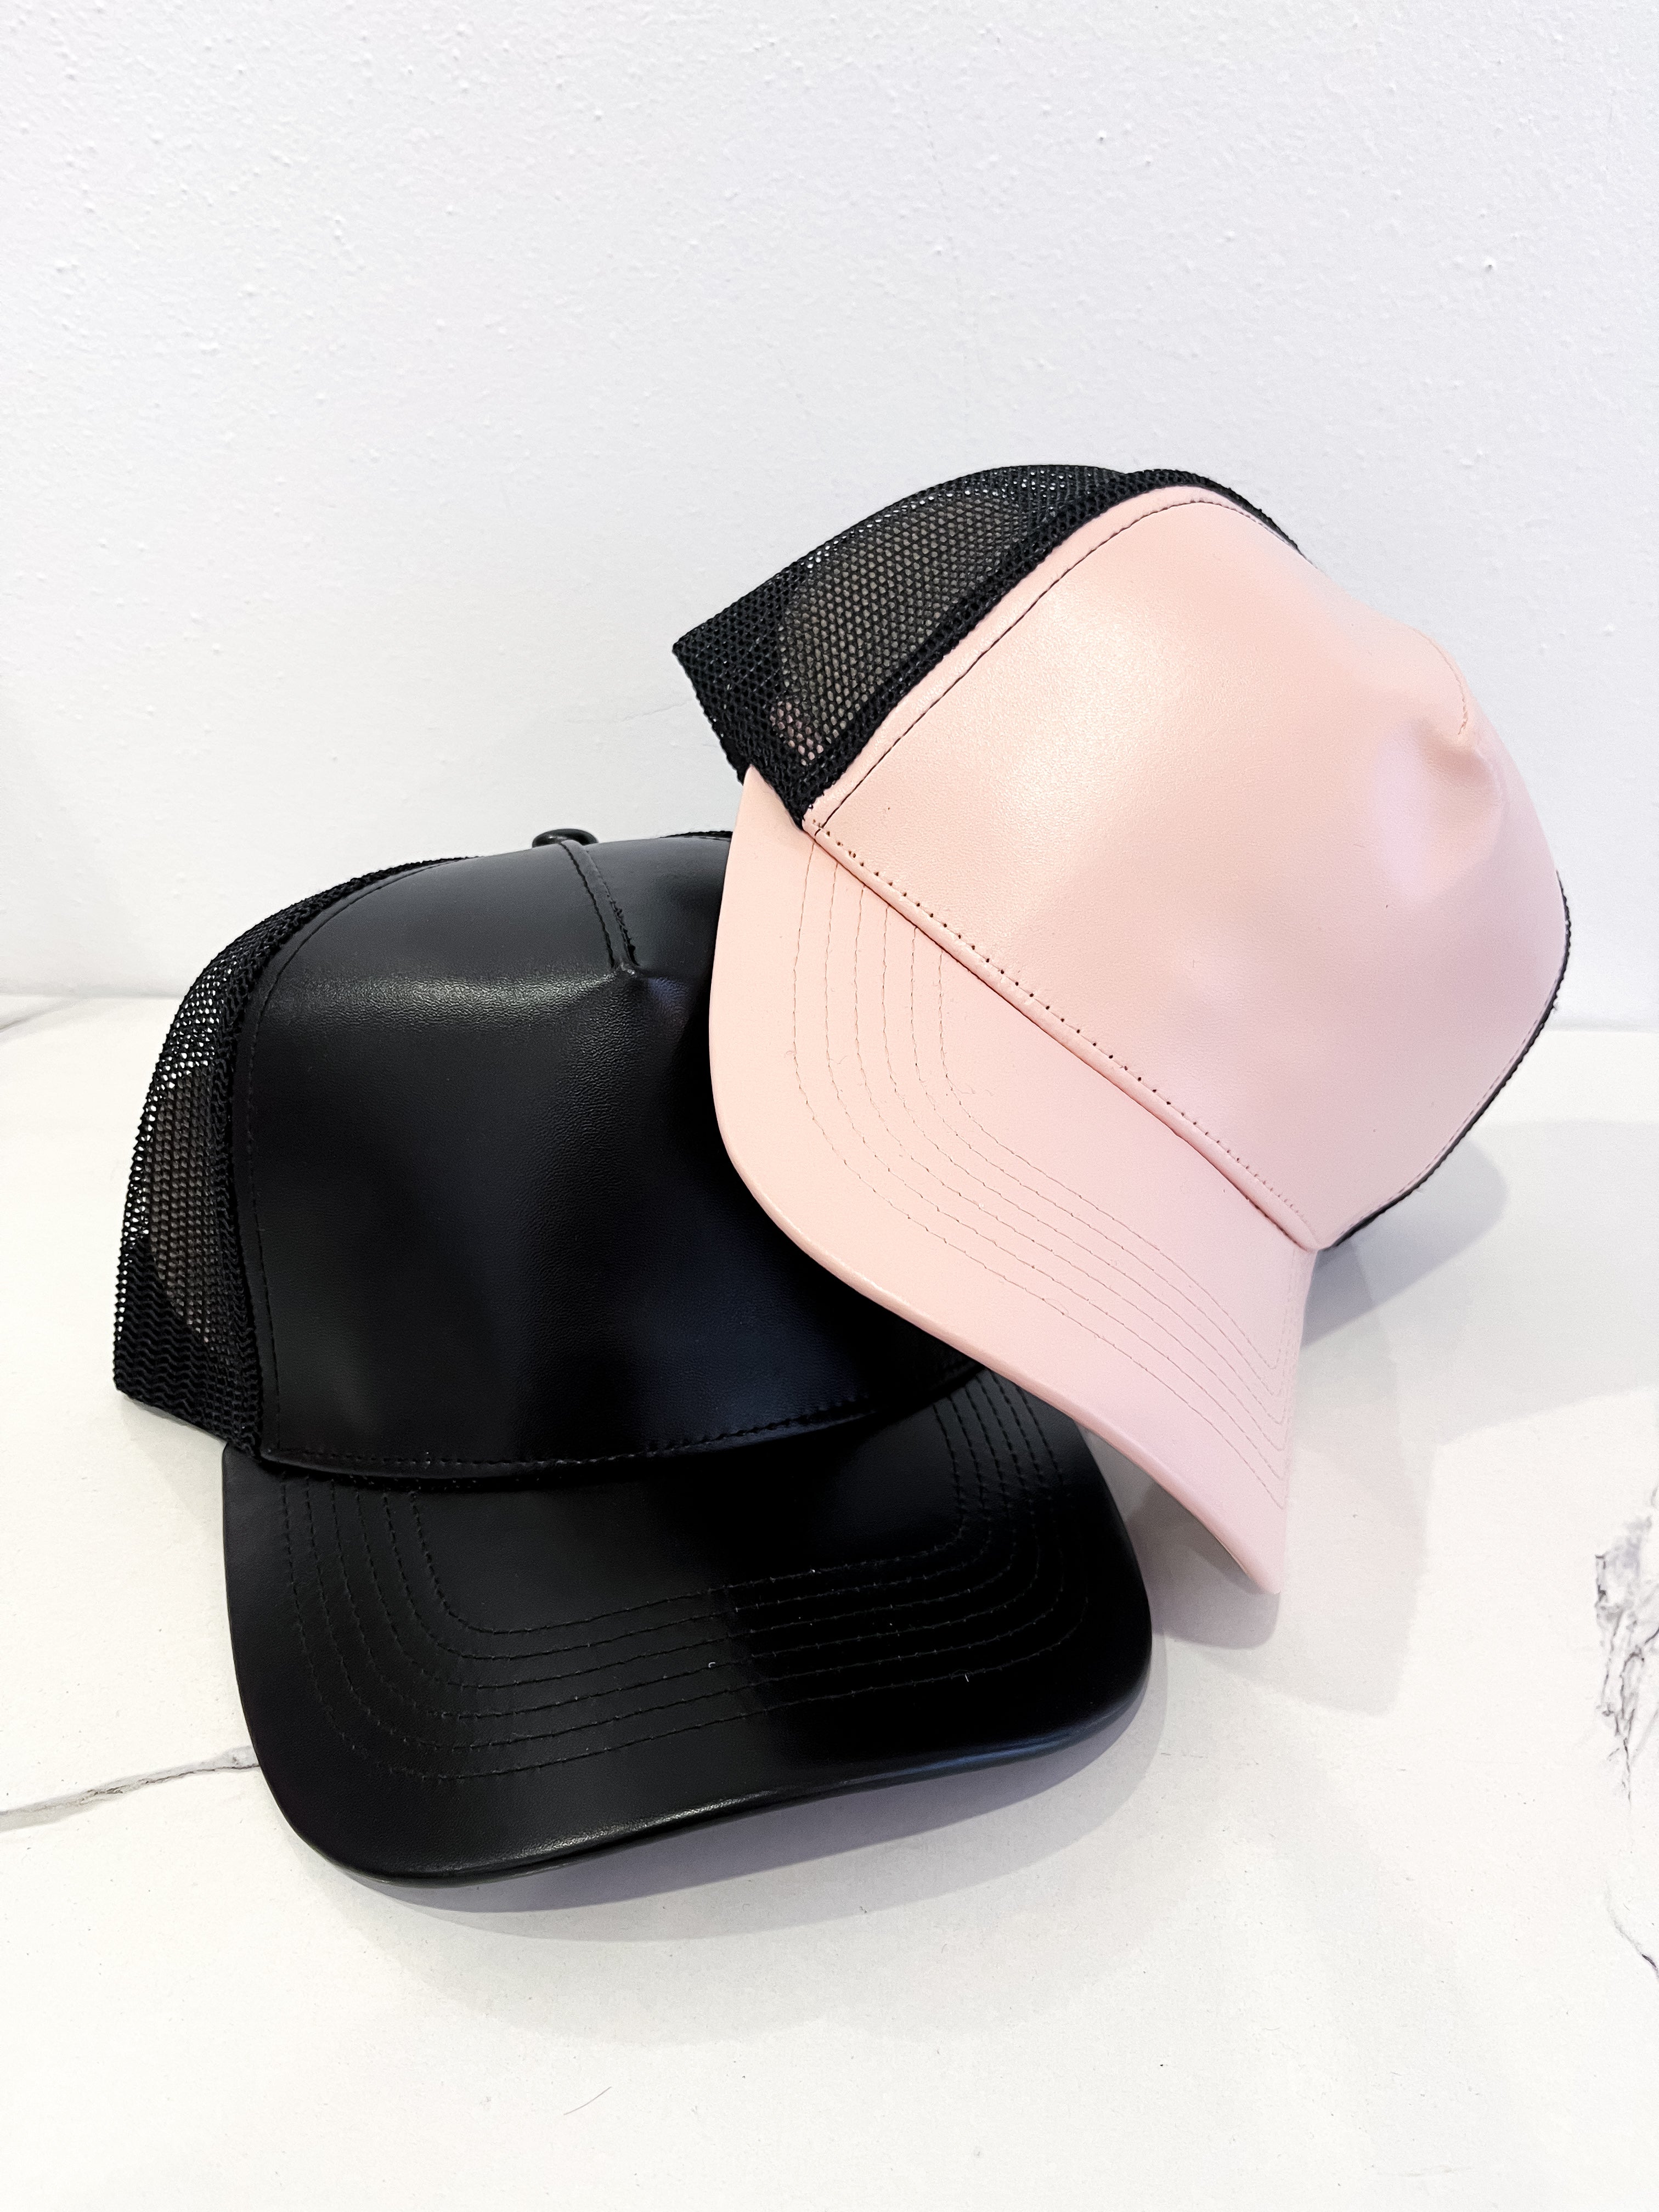 Pale Pink on Black Faux Leather Trucker Hat